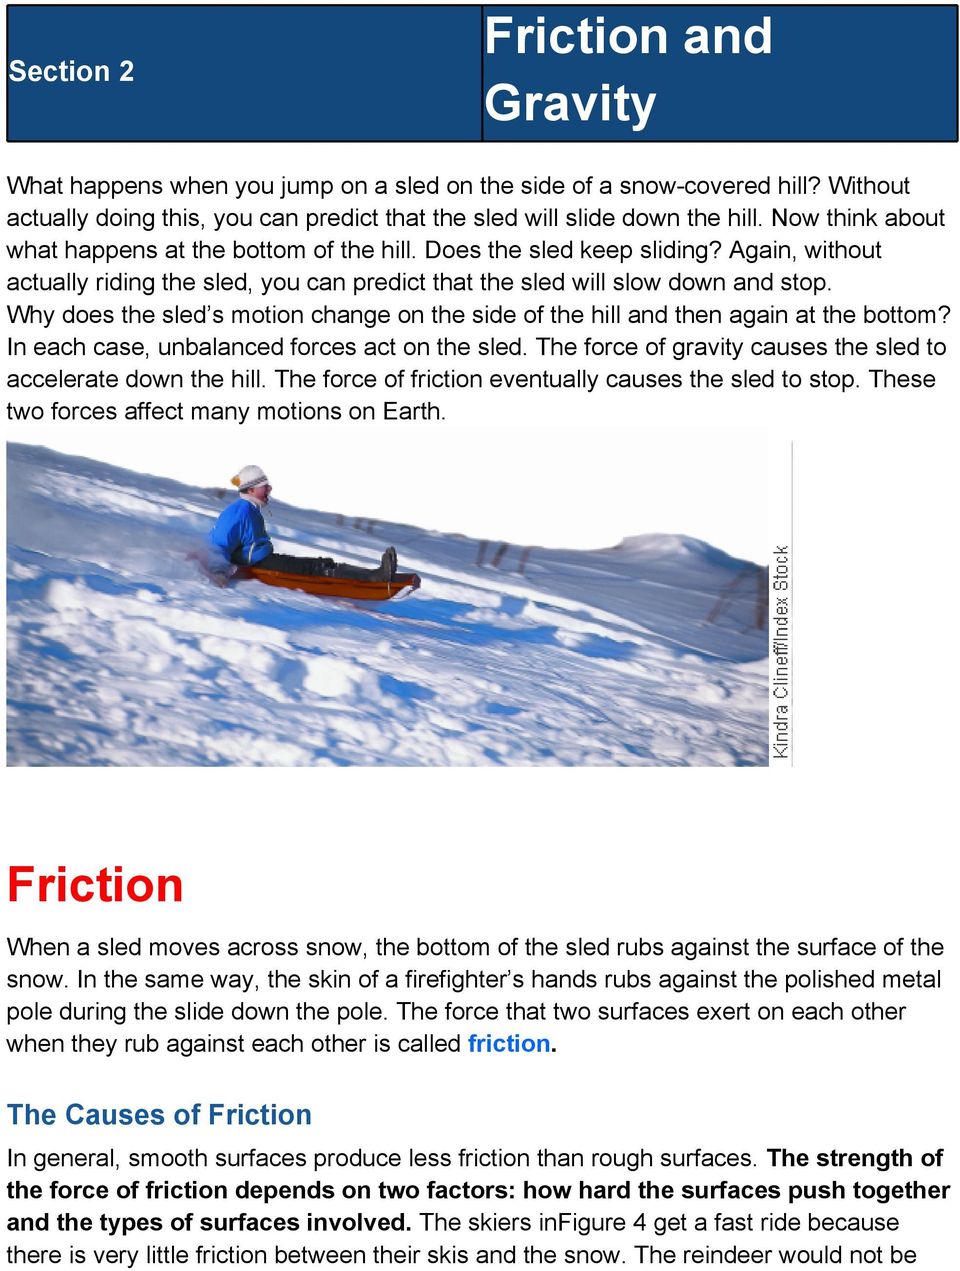 Why does the sled s motion change on the side of the hill and then again at the bottom? In each case, unbalanced forces act on the sled.